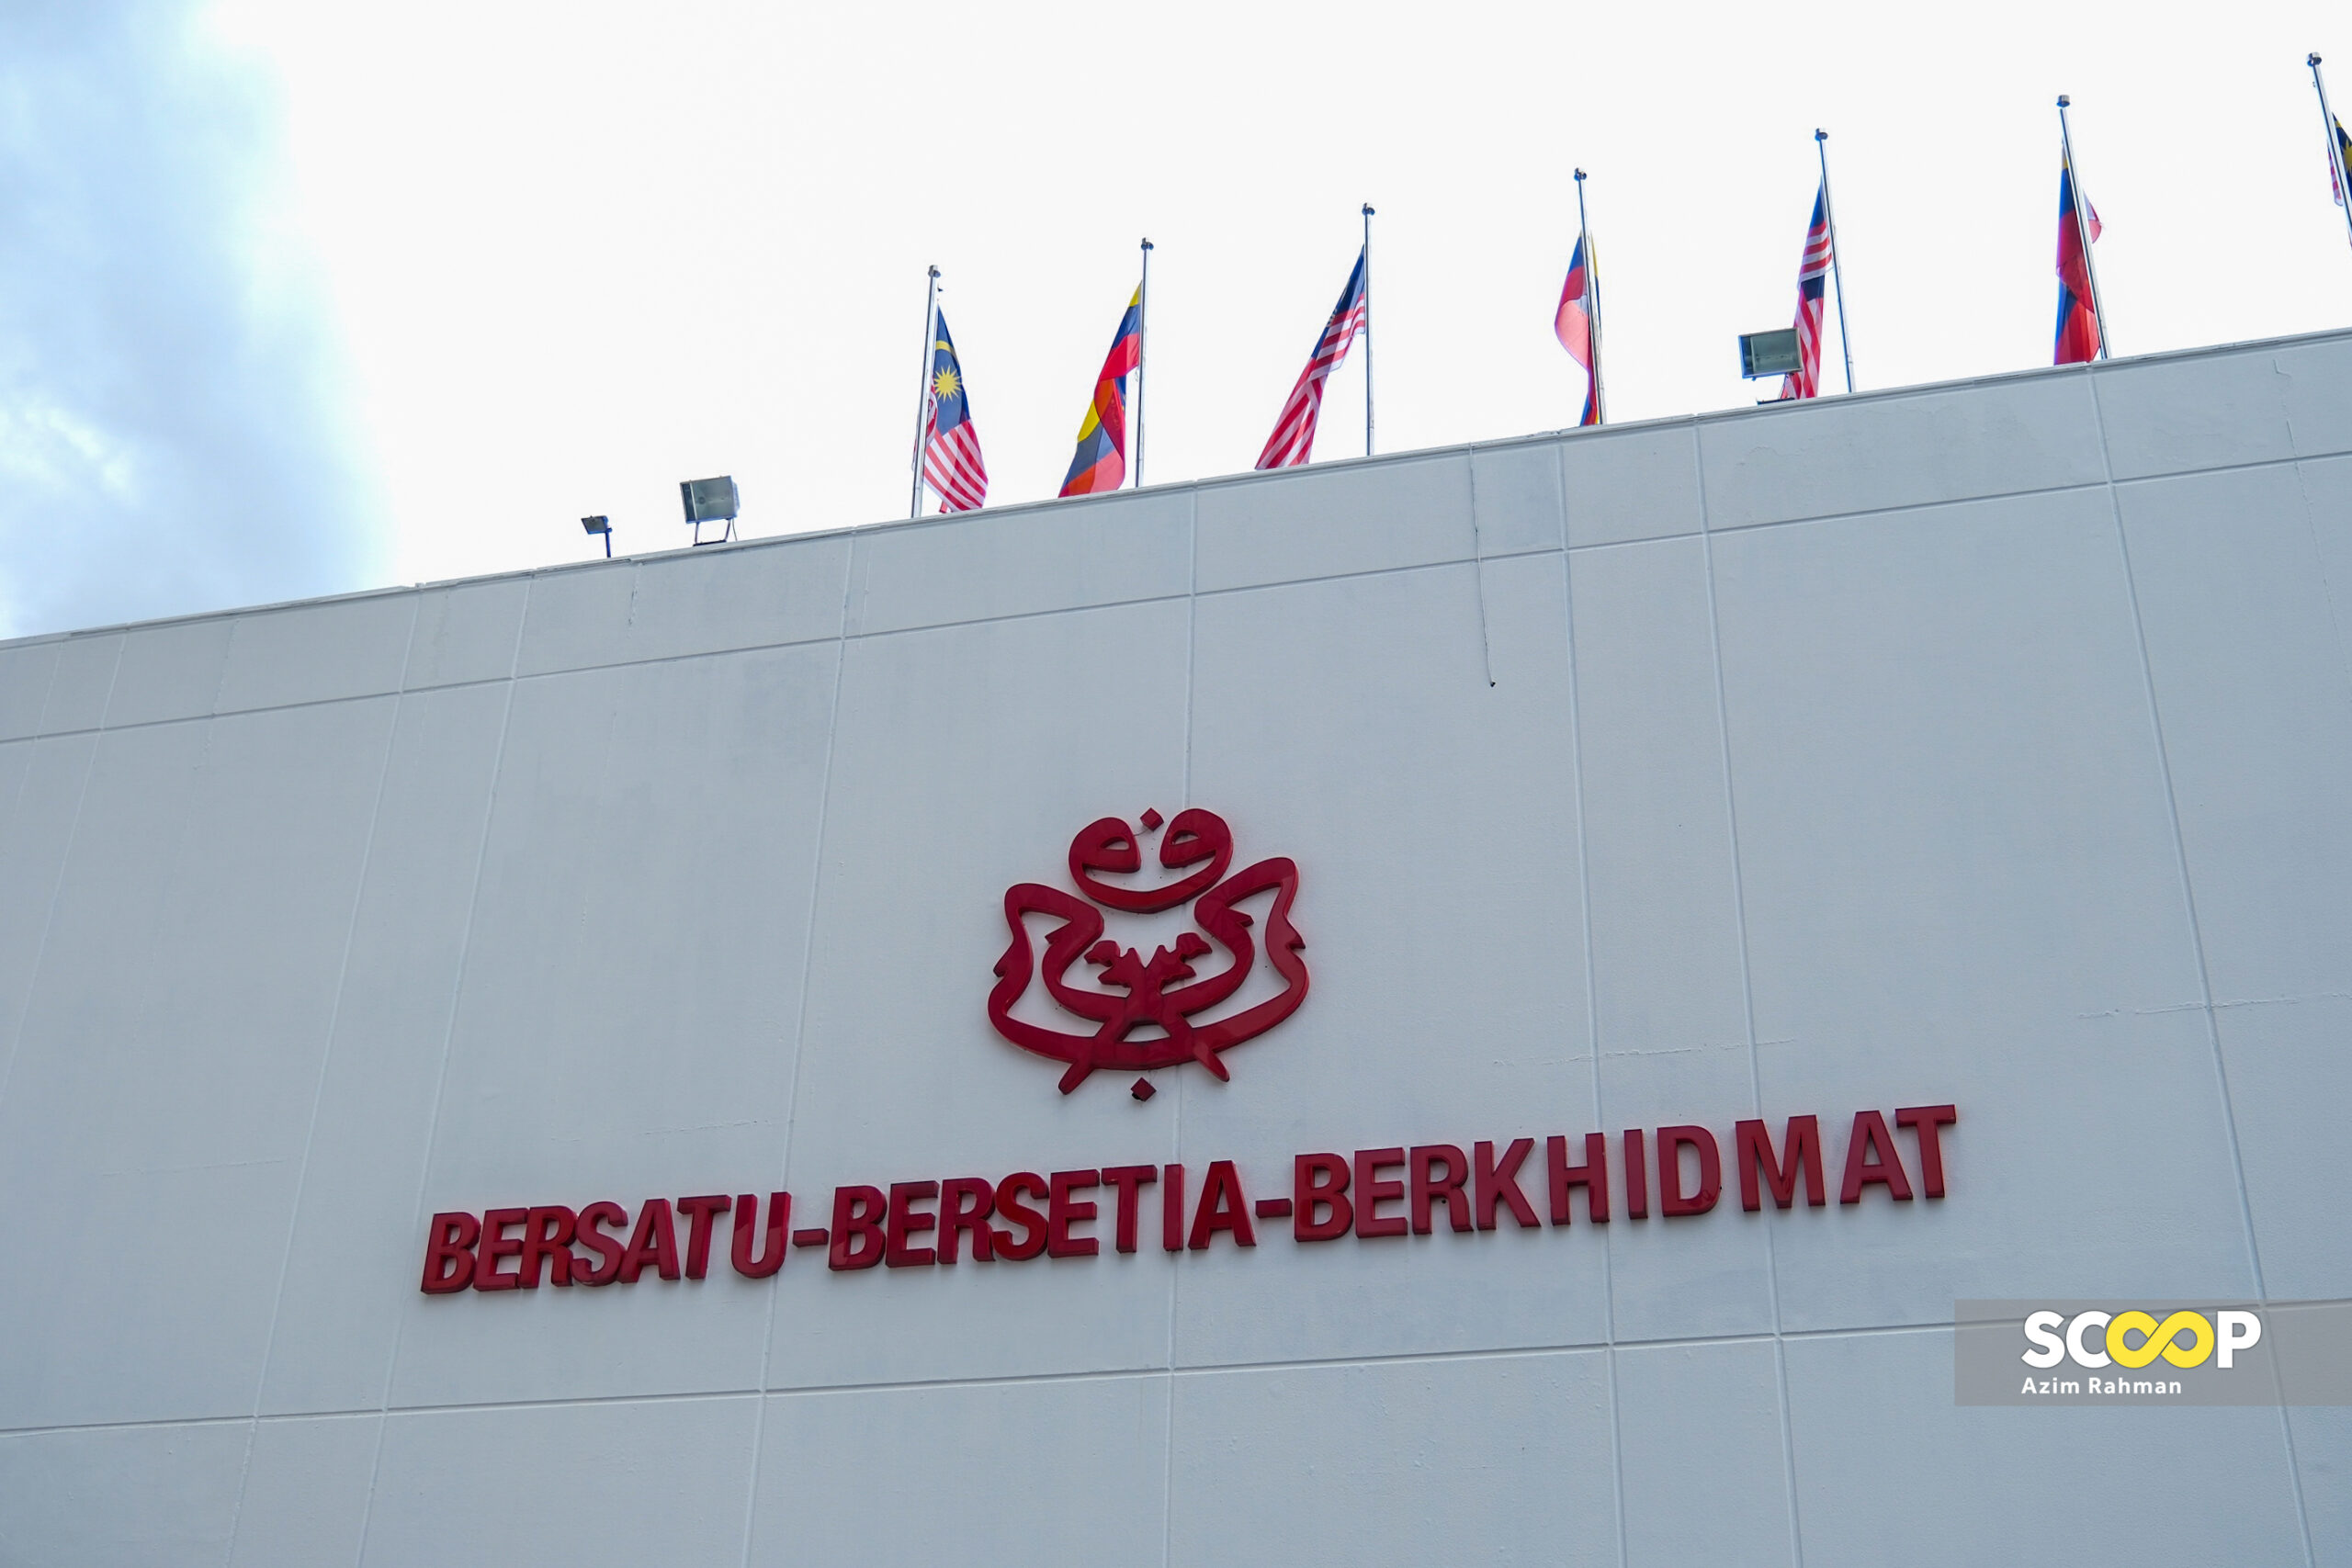 [UPDATED] Disappointed but fight goes on for Umno to secure justice for Najib